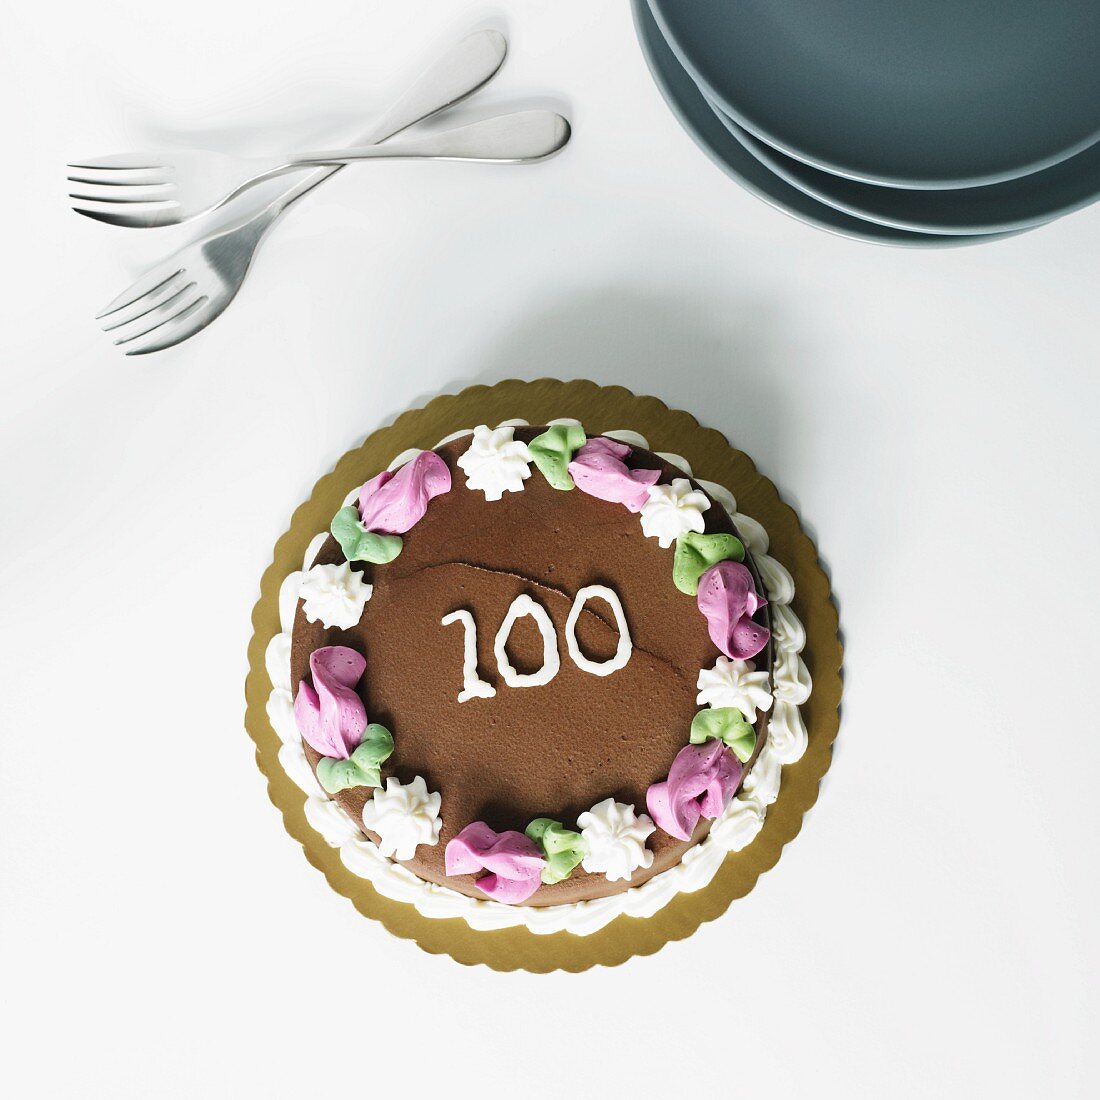 Chocolate Frosted Birthday Cake with the Number 100 On It; From Above